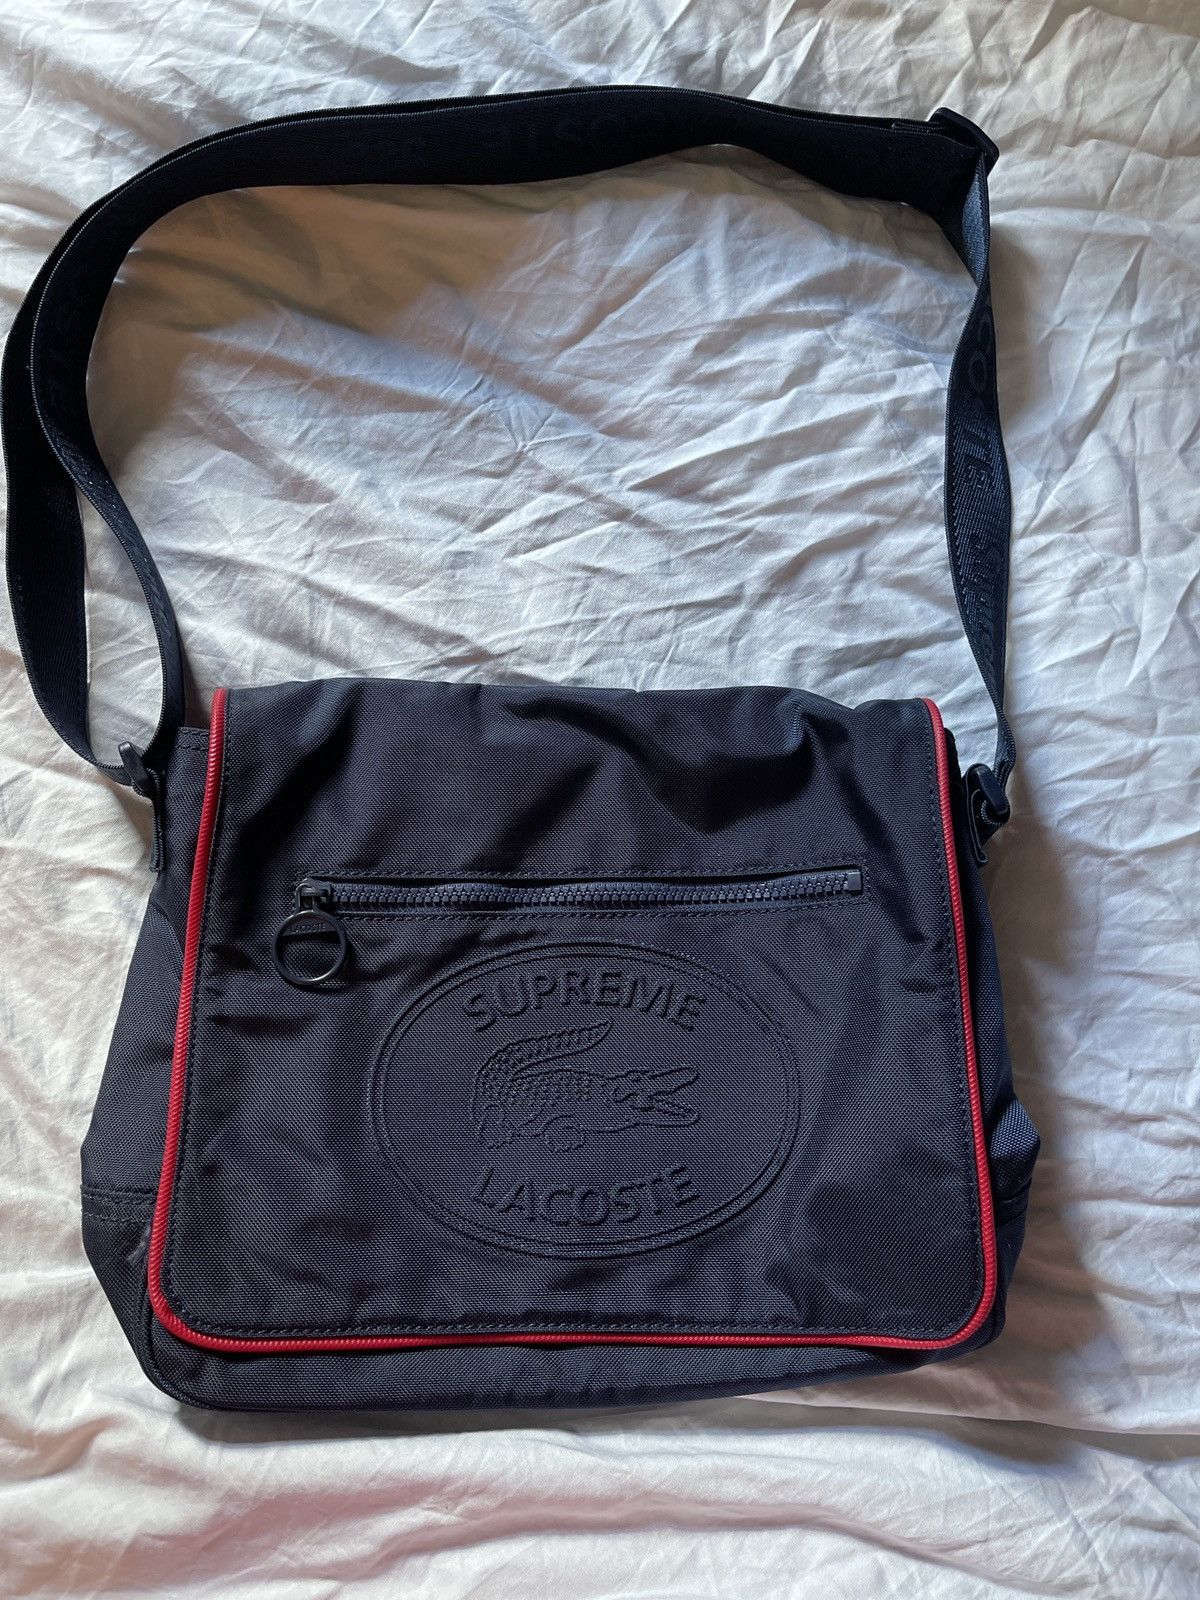 Buy Supreme x Lacoste Small Messenger Bag 'Navy' - FW19A14 NAVY